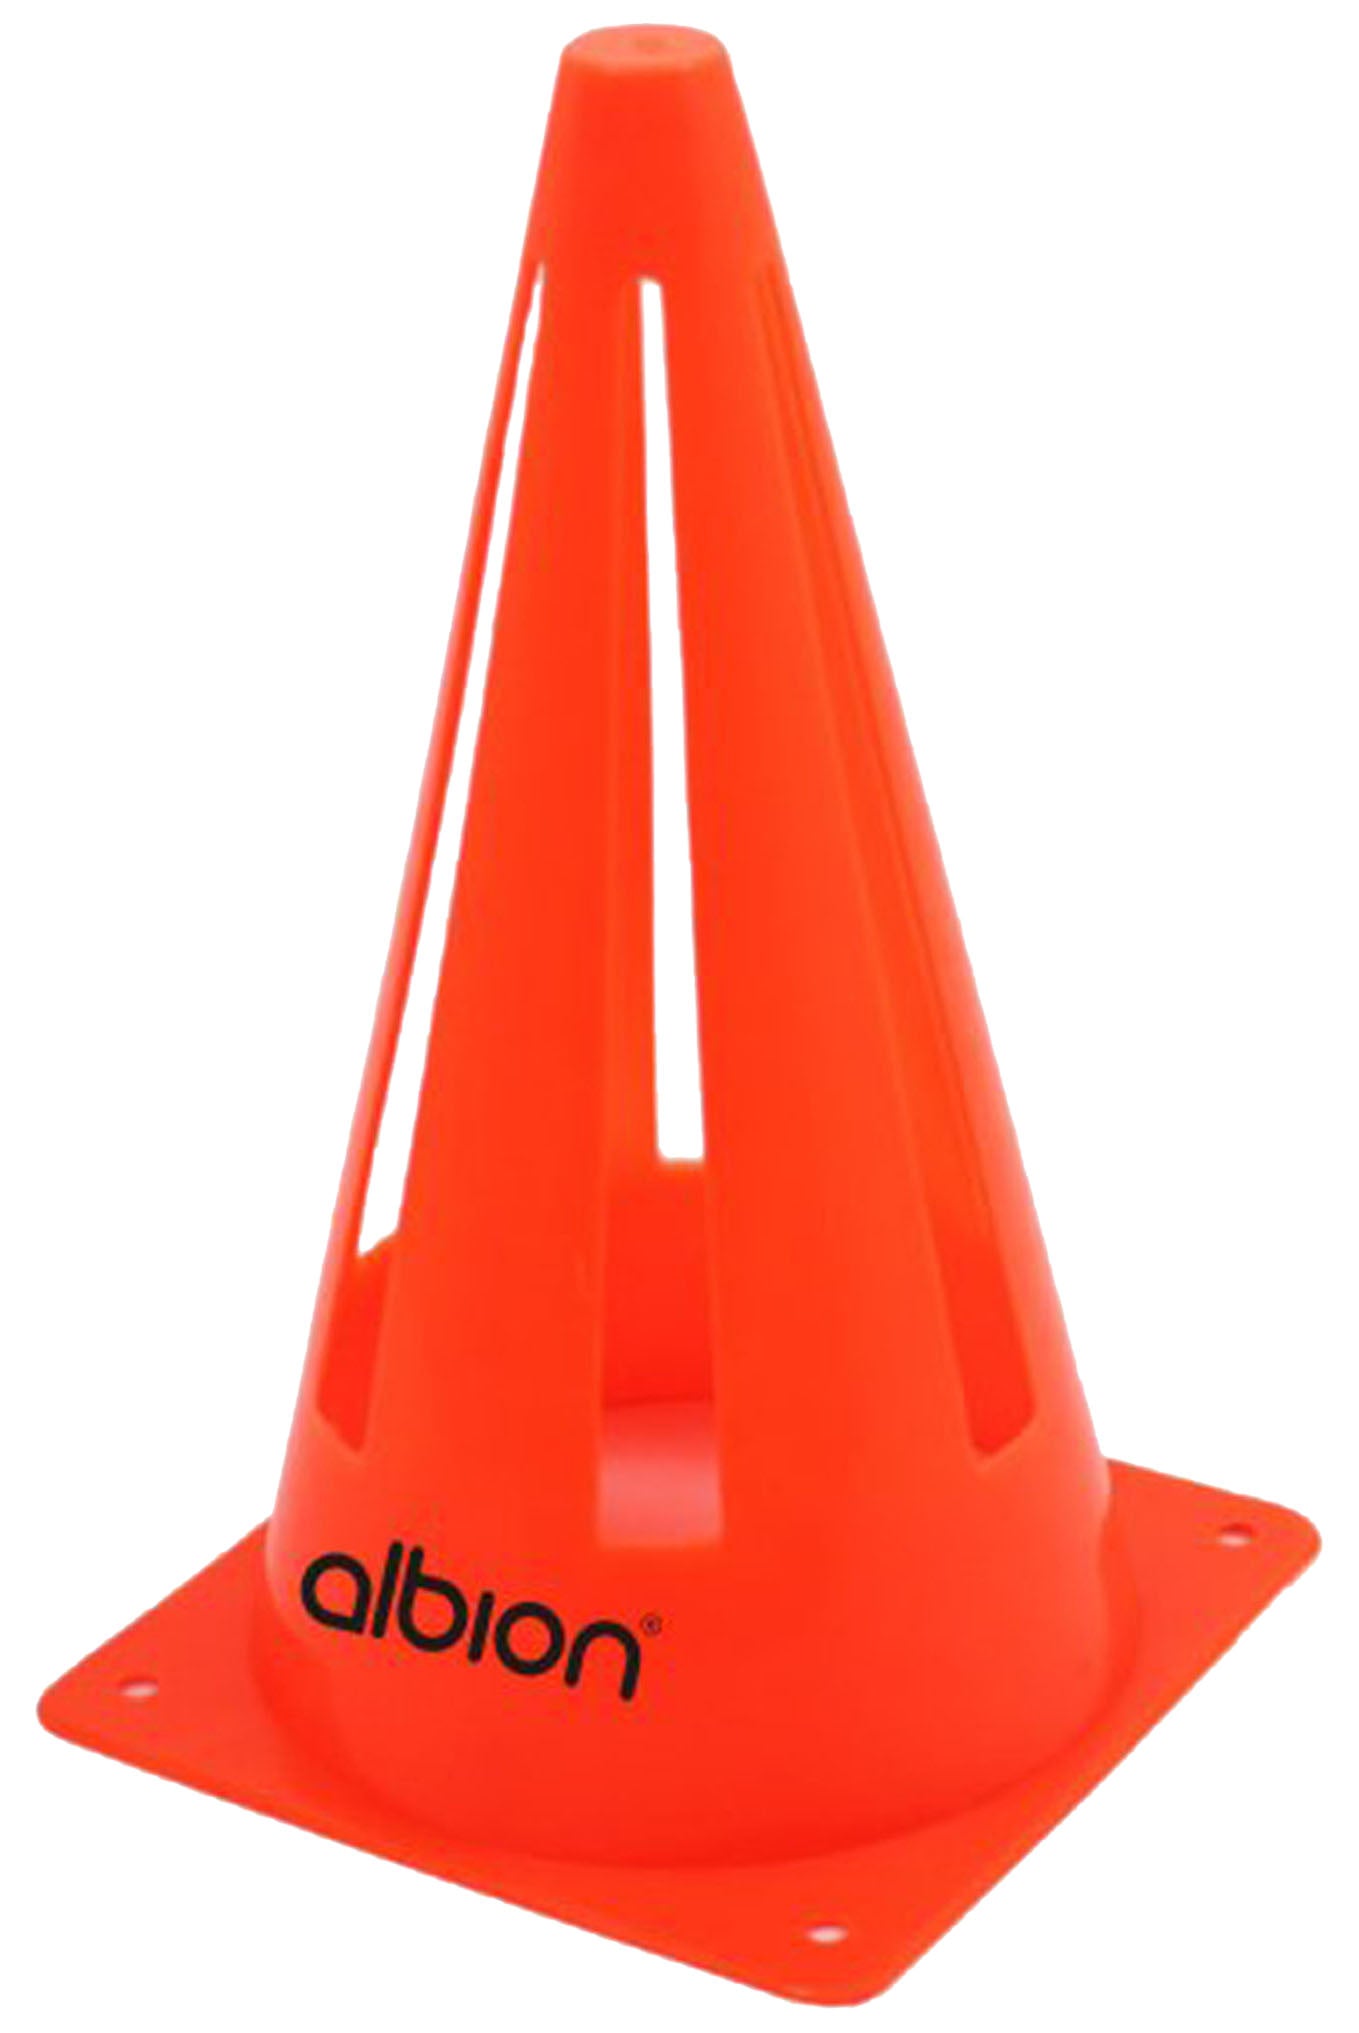 Albion Pop Up Cone